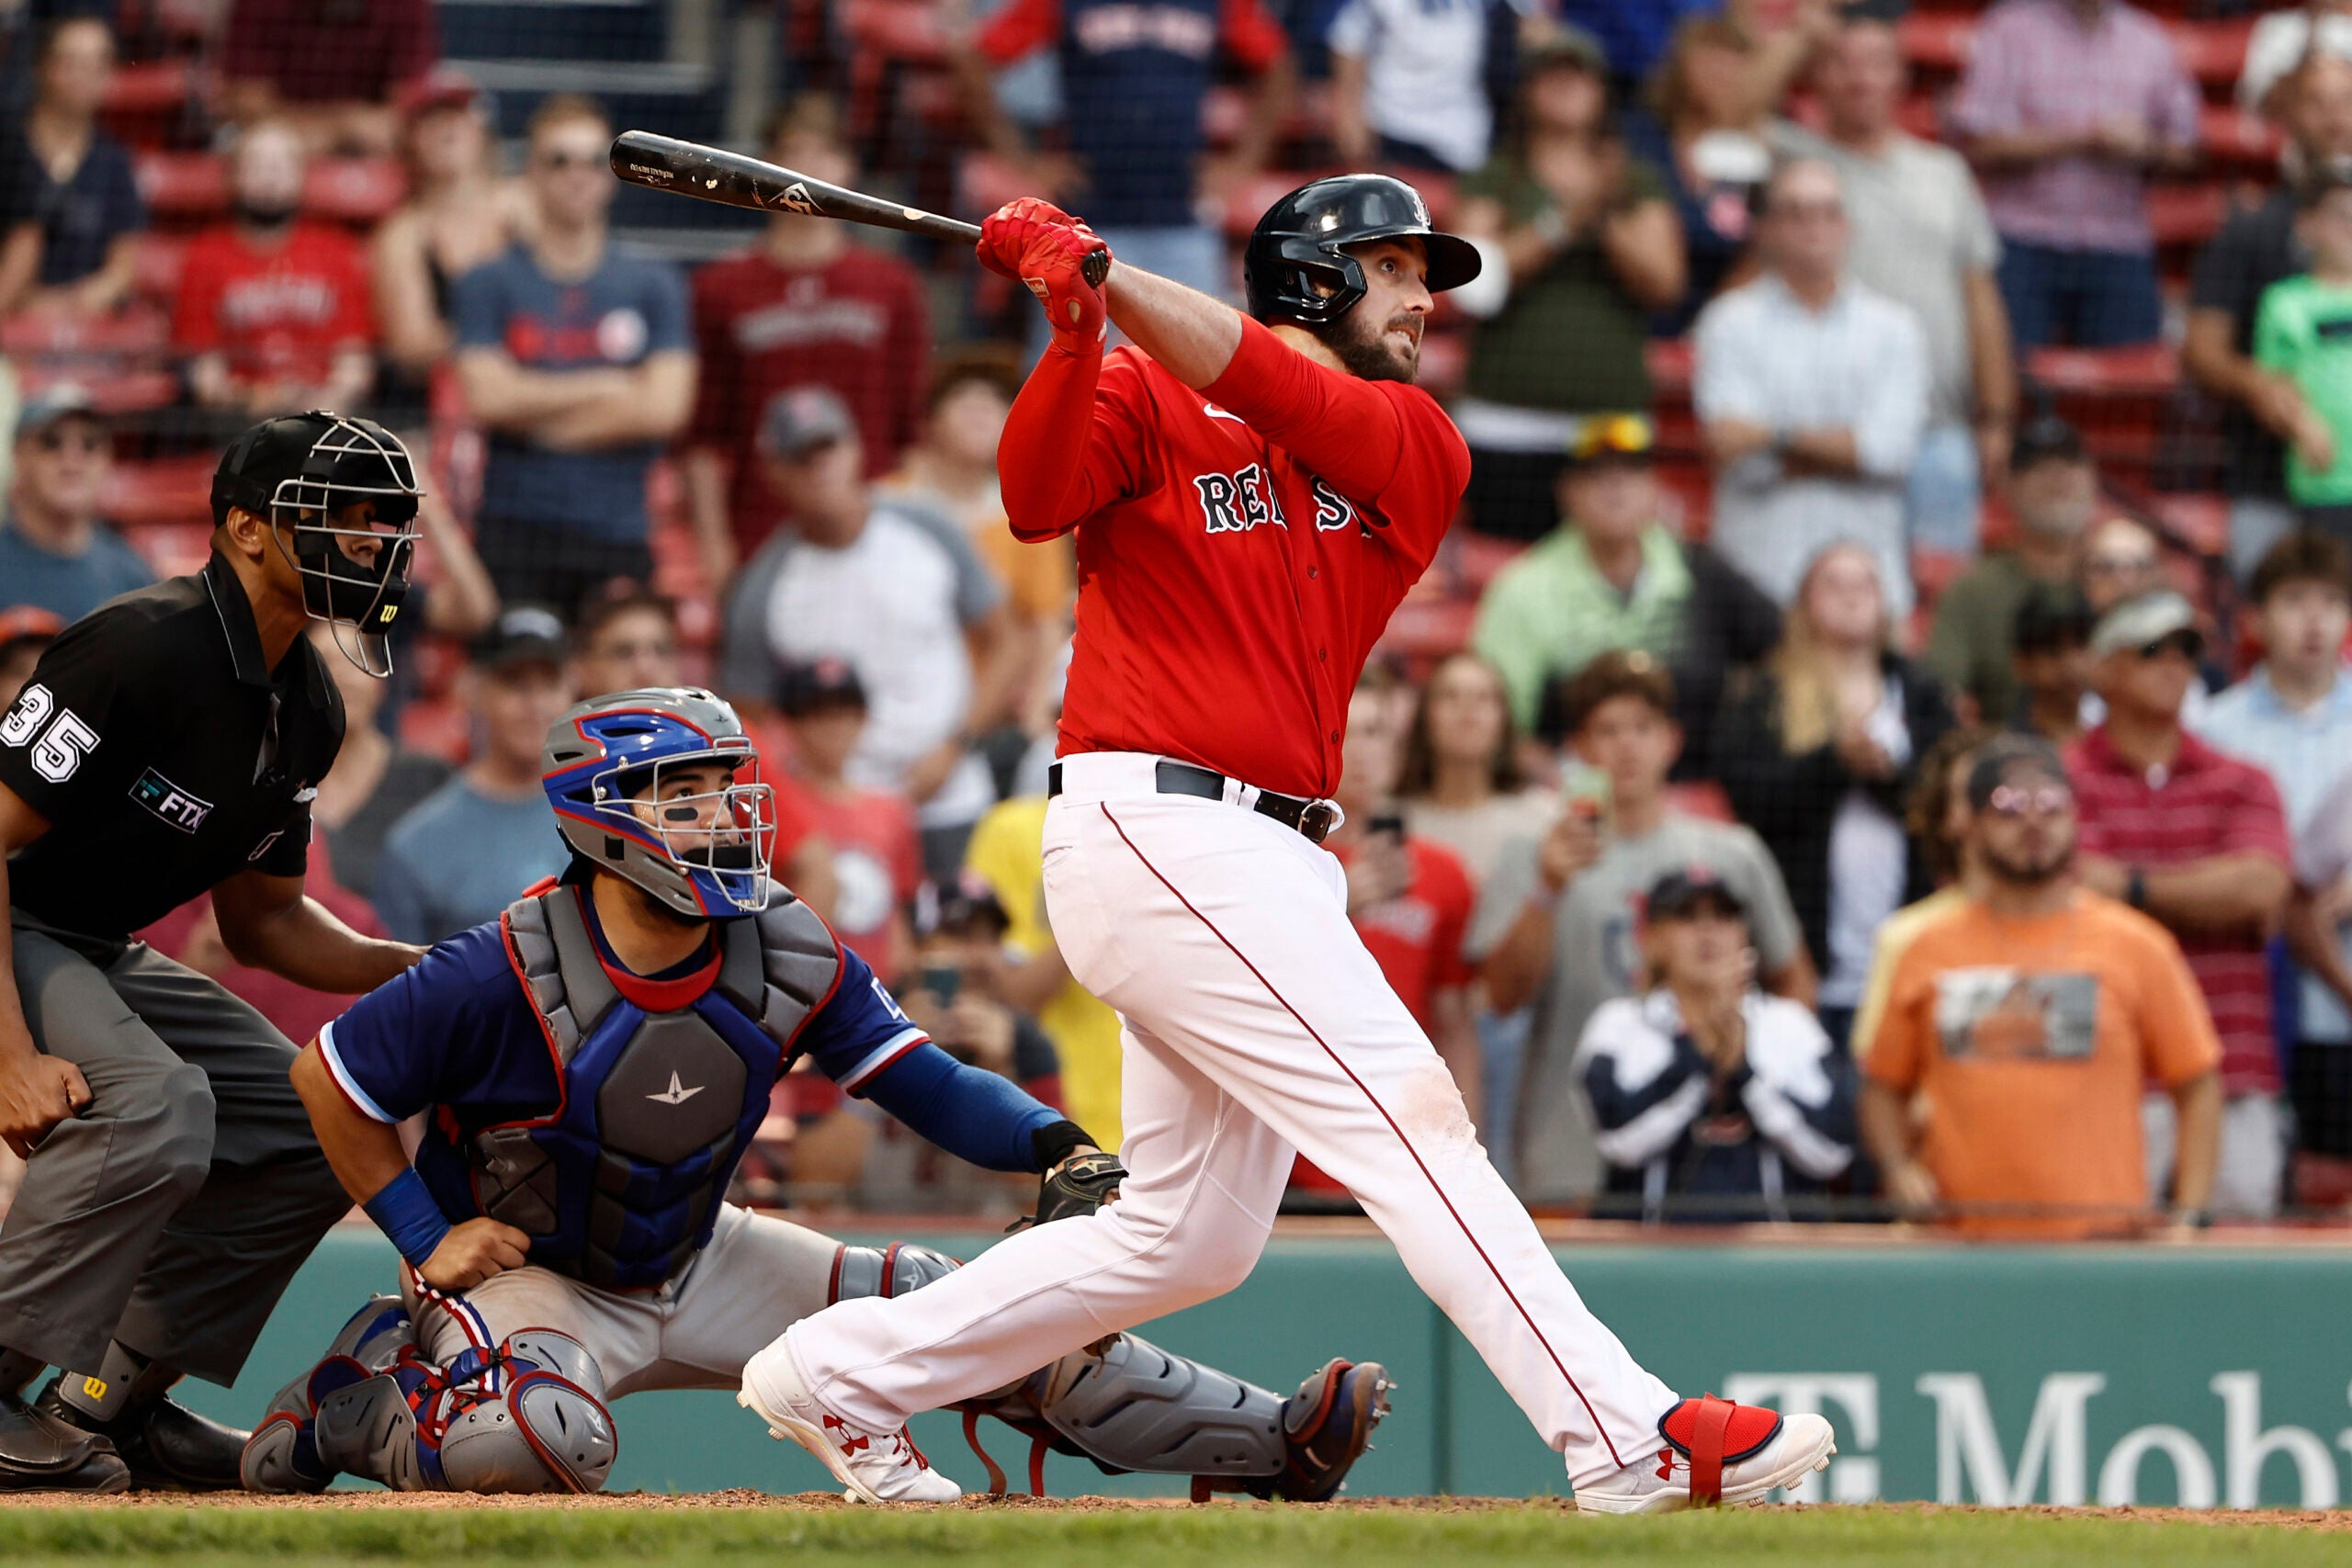 Did Red Sox make a mistake by trading Travis Shaw? - The Boston Globe